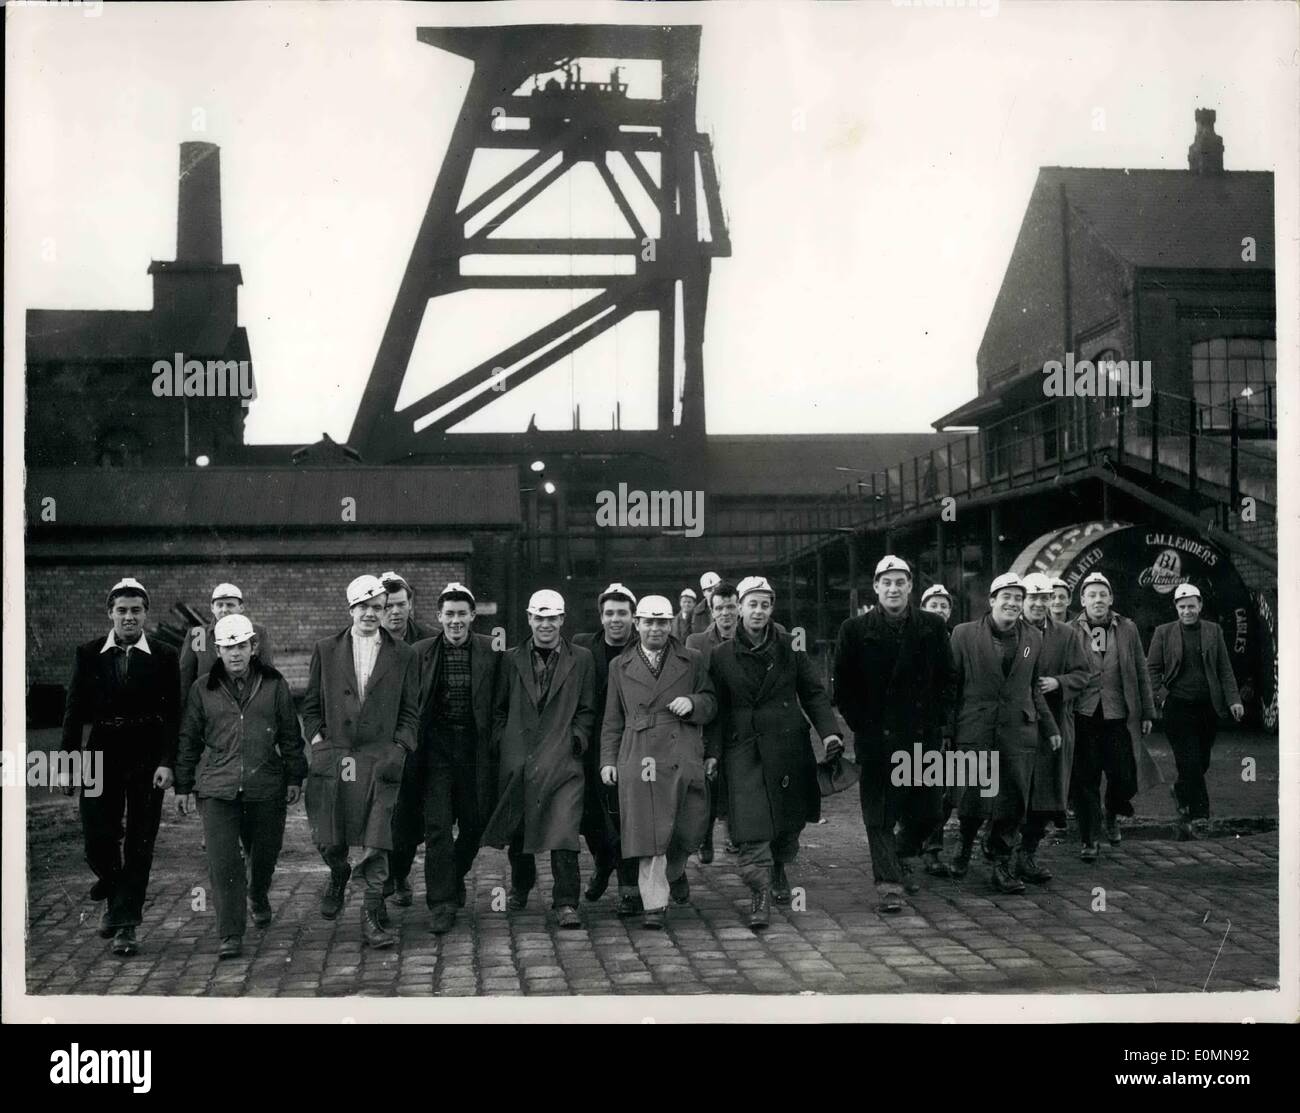 Jan. 01, 1956 - MERCHANT SEAMEN TAKE TO MINING The National Coal Board have recruited coming miners from among dissatisfied merchant seamen at Liverpool. The men, who total about 60 from Liverpool and Merseyside, started their training this week at the Sandhole Training Centre, Walkden. They are brought to the centre by bus in the morning and taken back in the afternoon. During this week they get film shows and instruction on safety. KEYSTONE PHOTO SHOWS:- A group of some of the seamen - seen at the training centre. Stock Photo